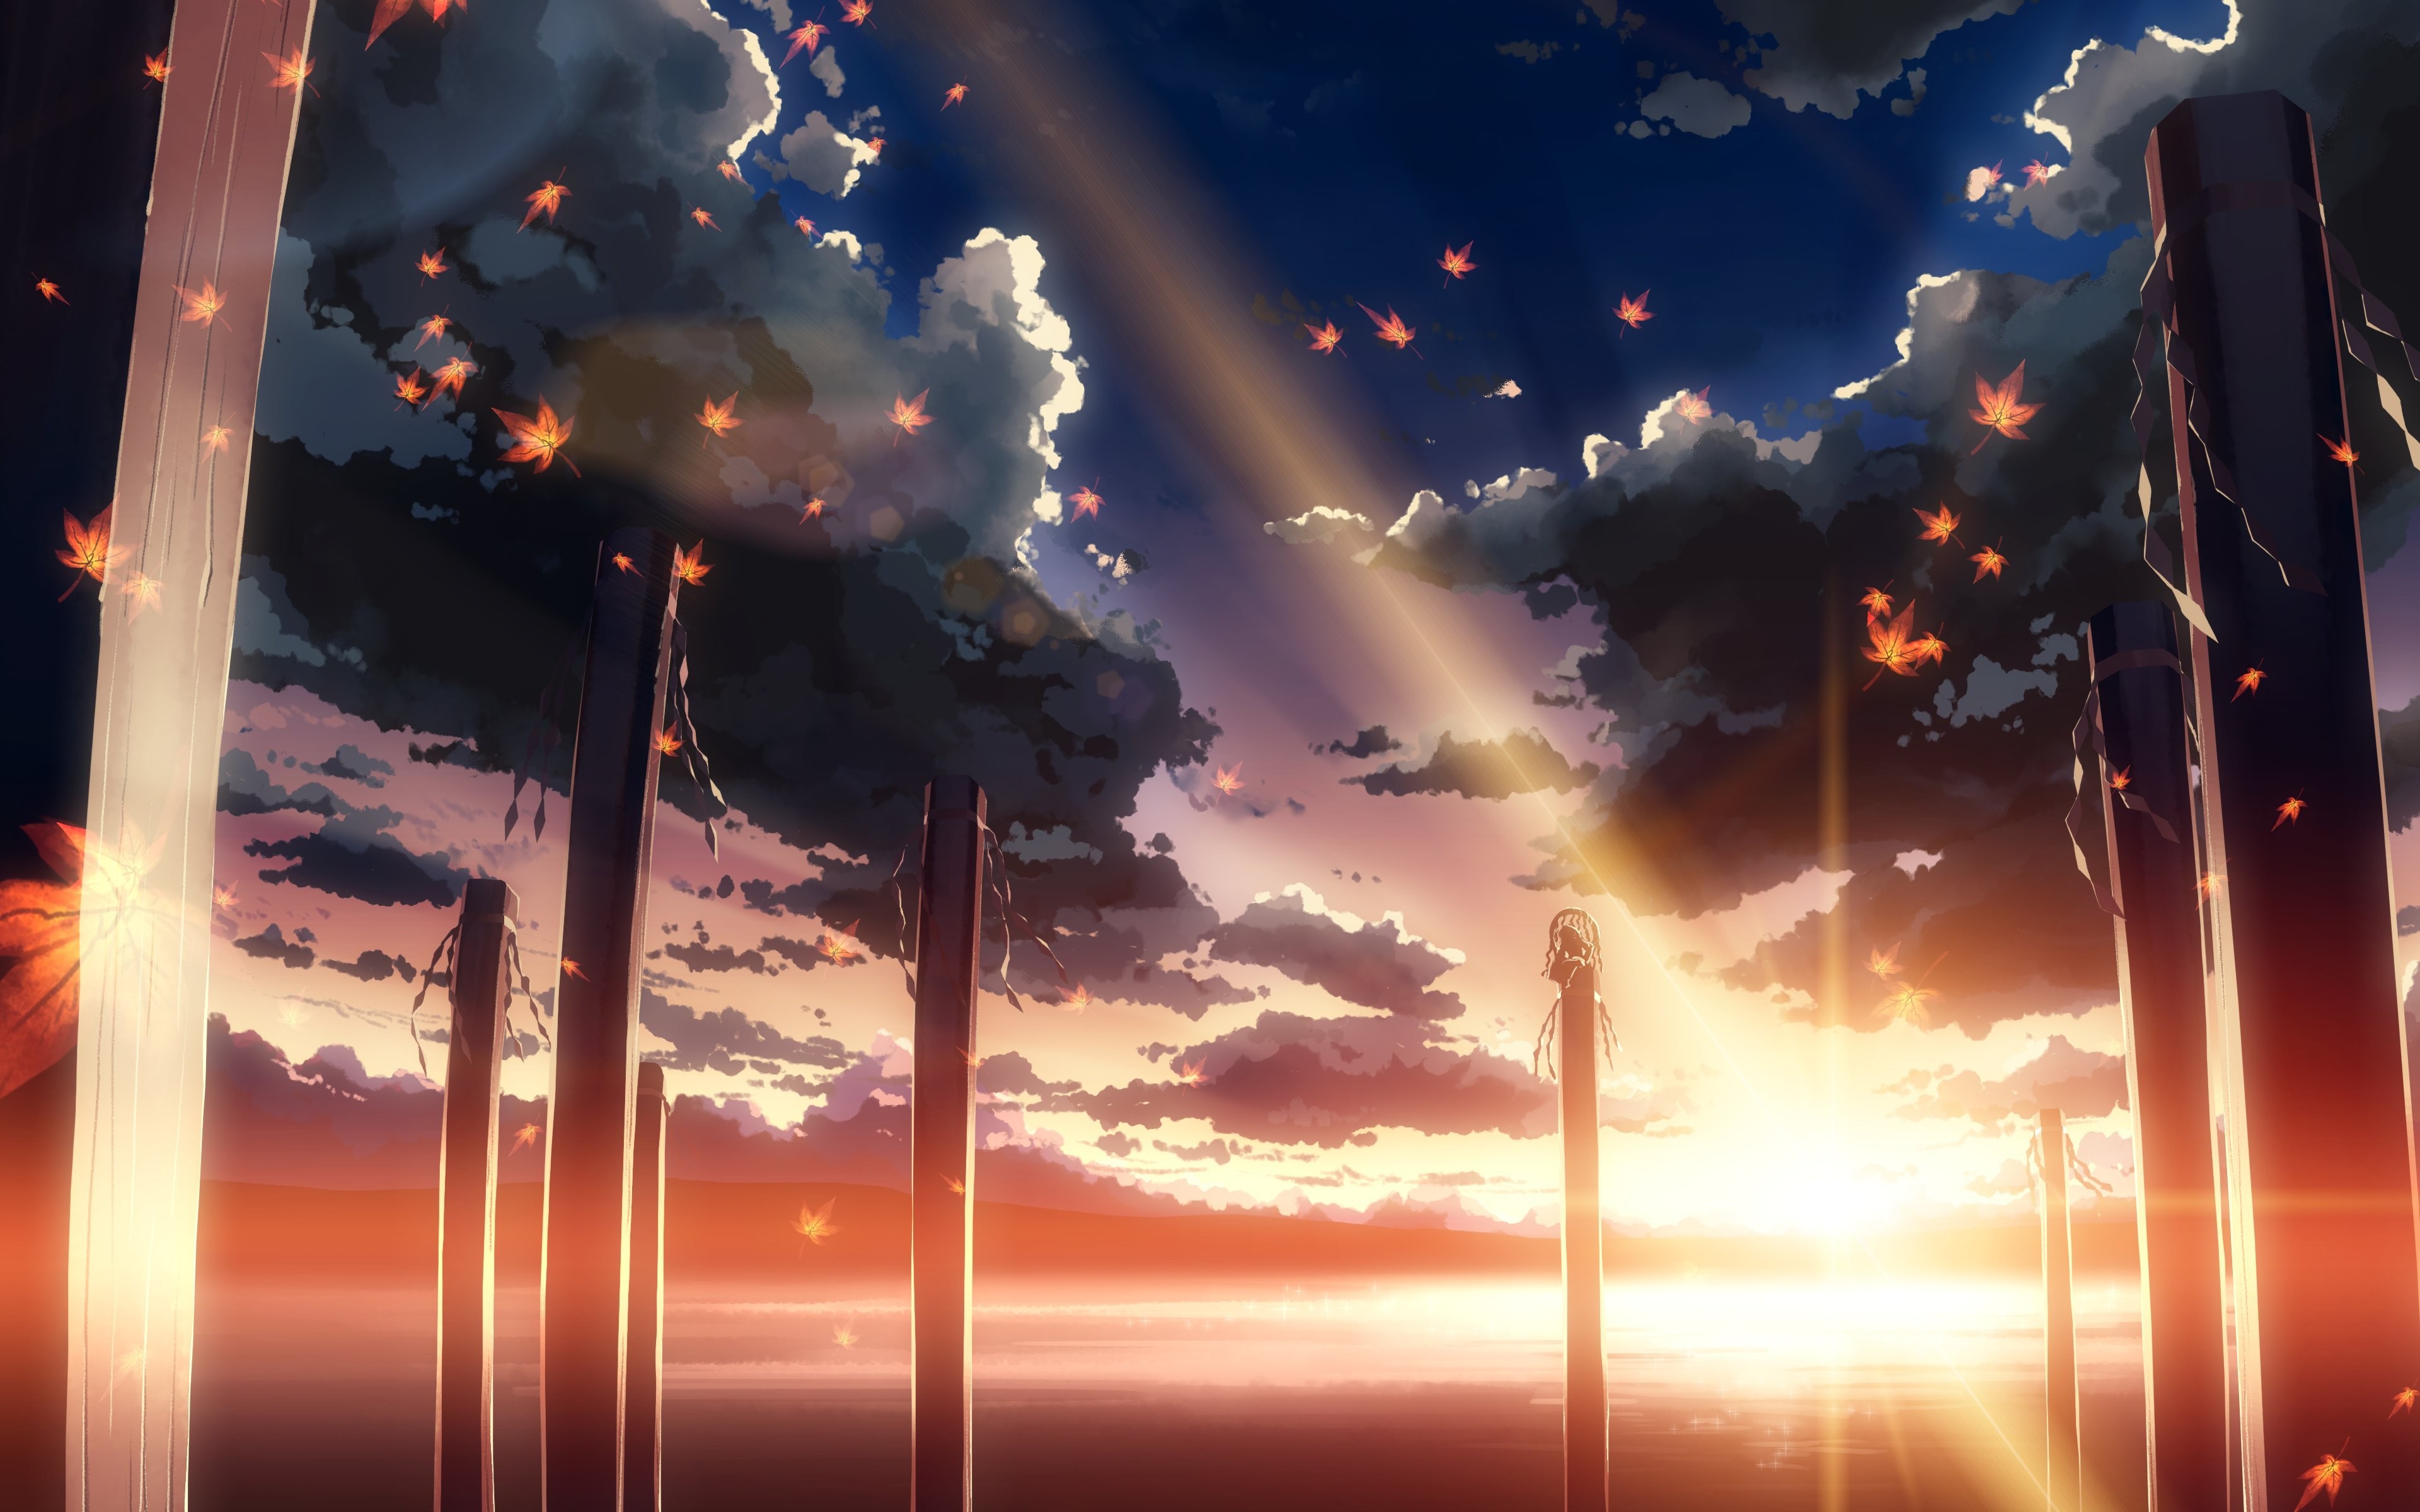 clouds, Touhou, Sun, Leaves, Sunlight, Maple, Leaf, Lakes, Yasaka, Kanako, Skyscapes, Games Wallpaper